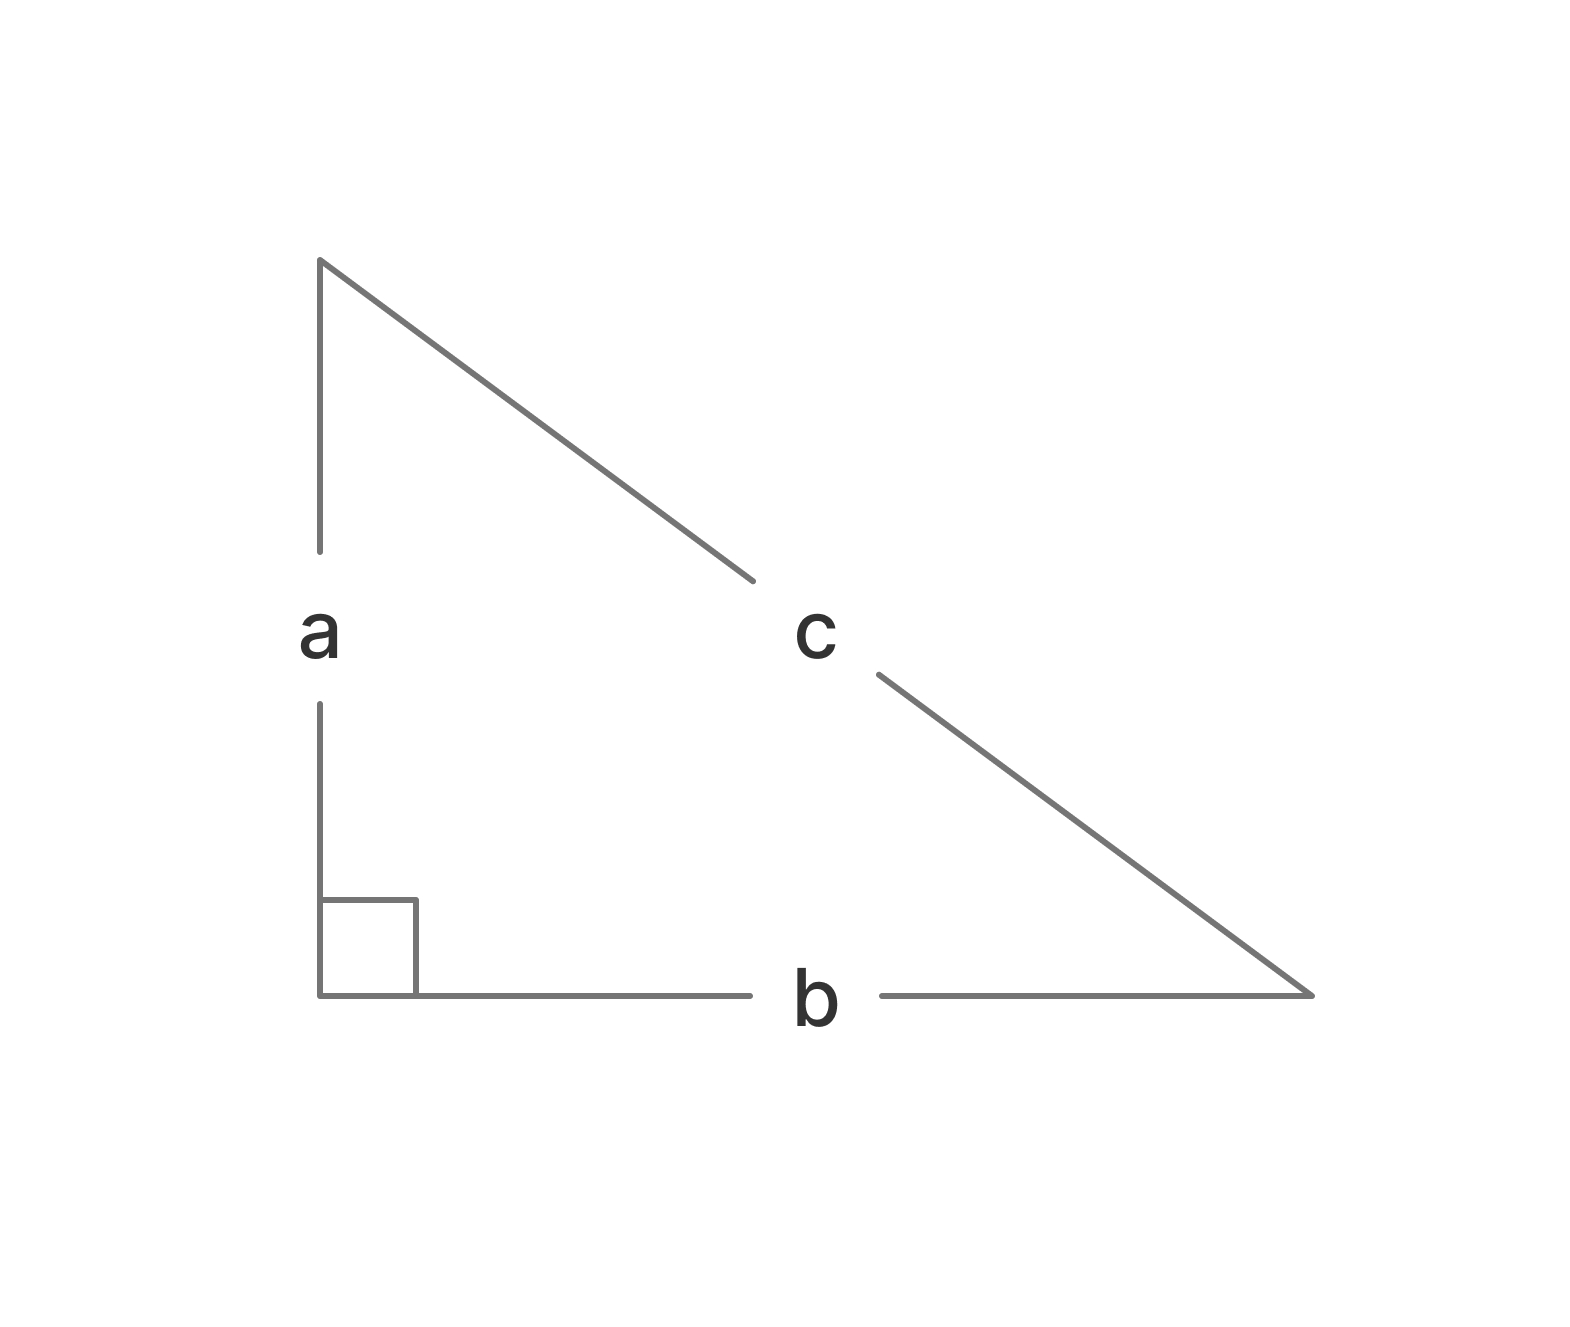  Image of a triangle demonstrating the Pythagorean Theorem with sides labeled a, b, and c.